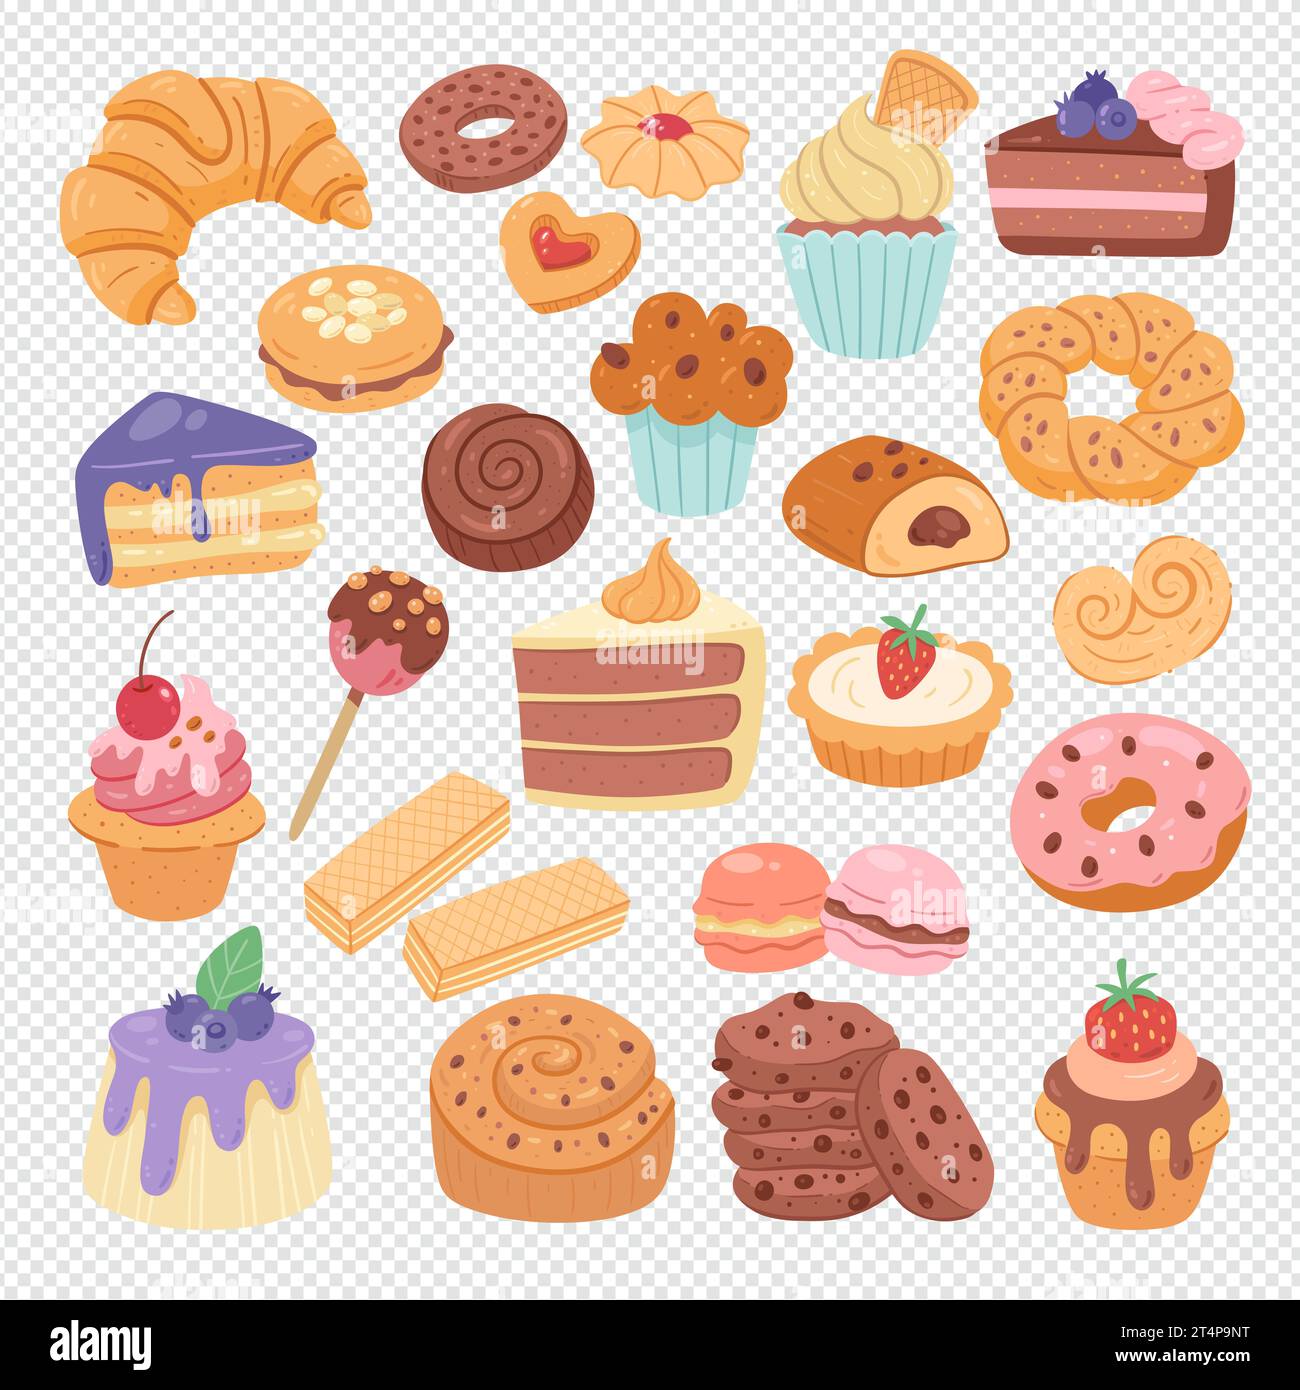 Dessert products isolated on white background. Cupcakes, sweets, ice creams, and pastries. Hand-drawn illustration. Isolated clip arts. Vector illustr Stock Vector